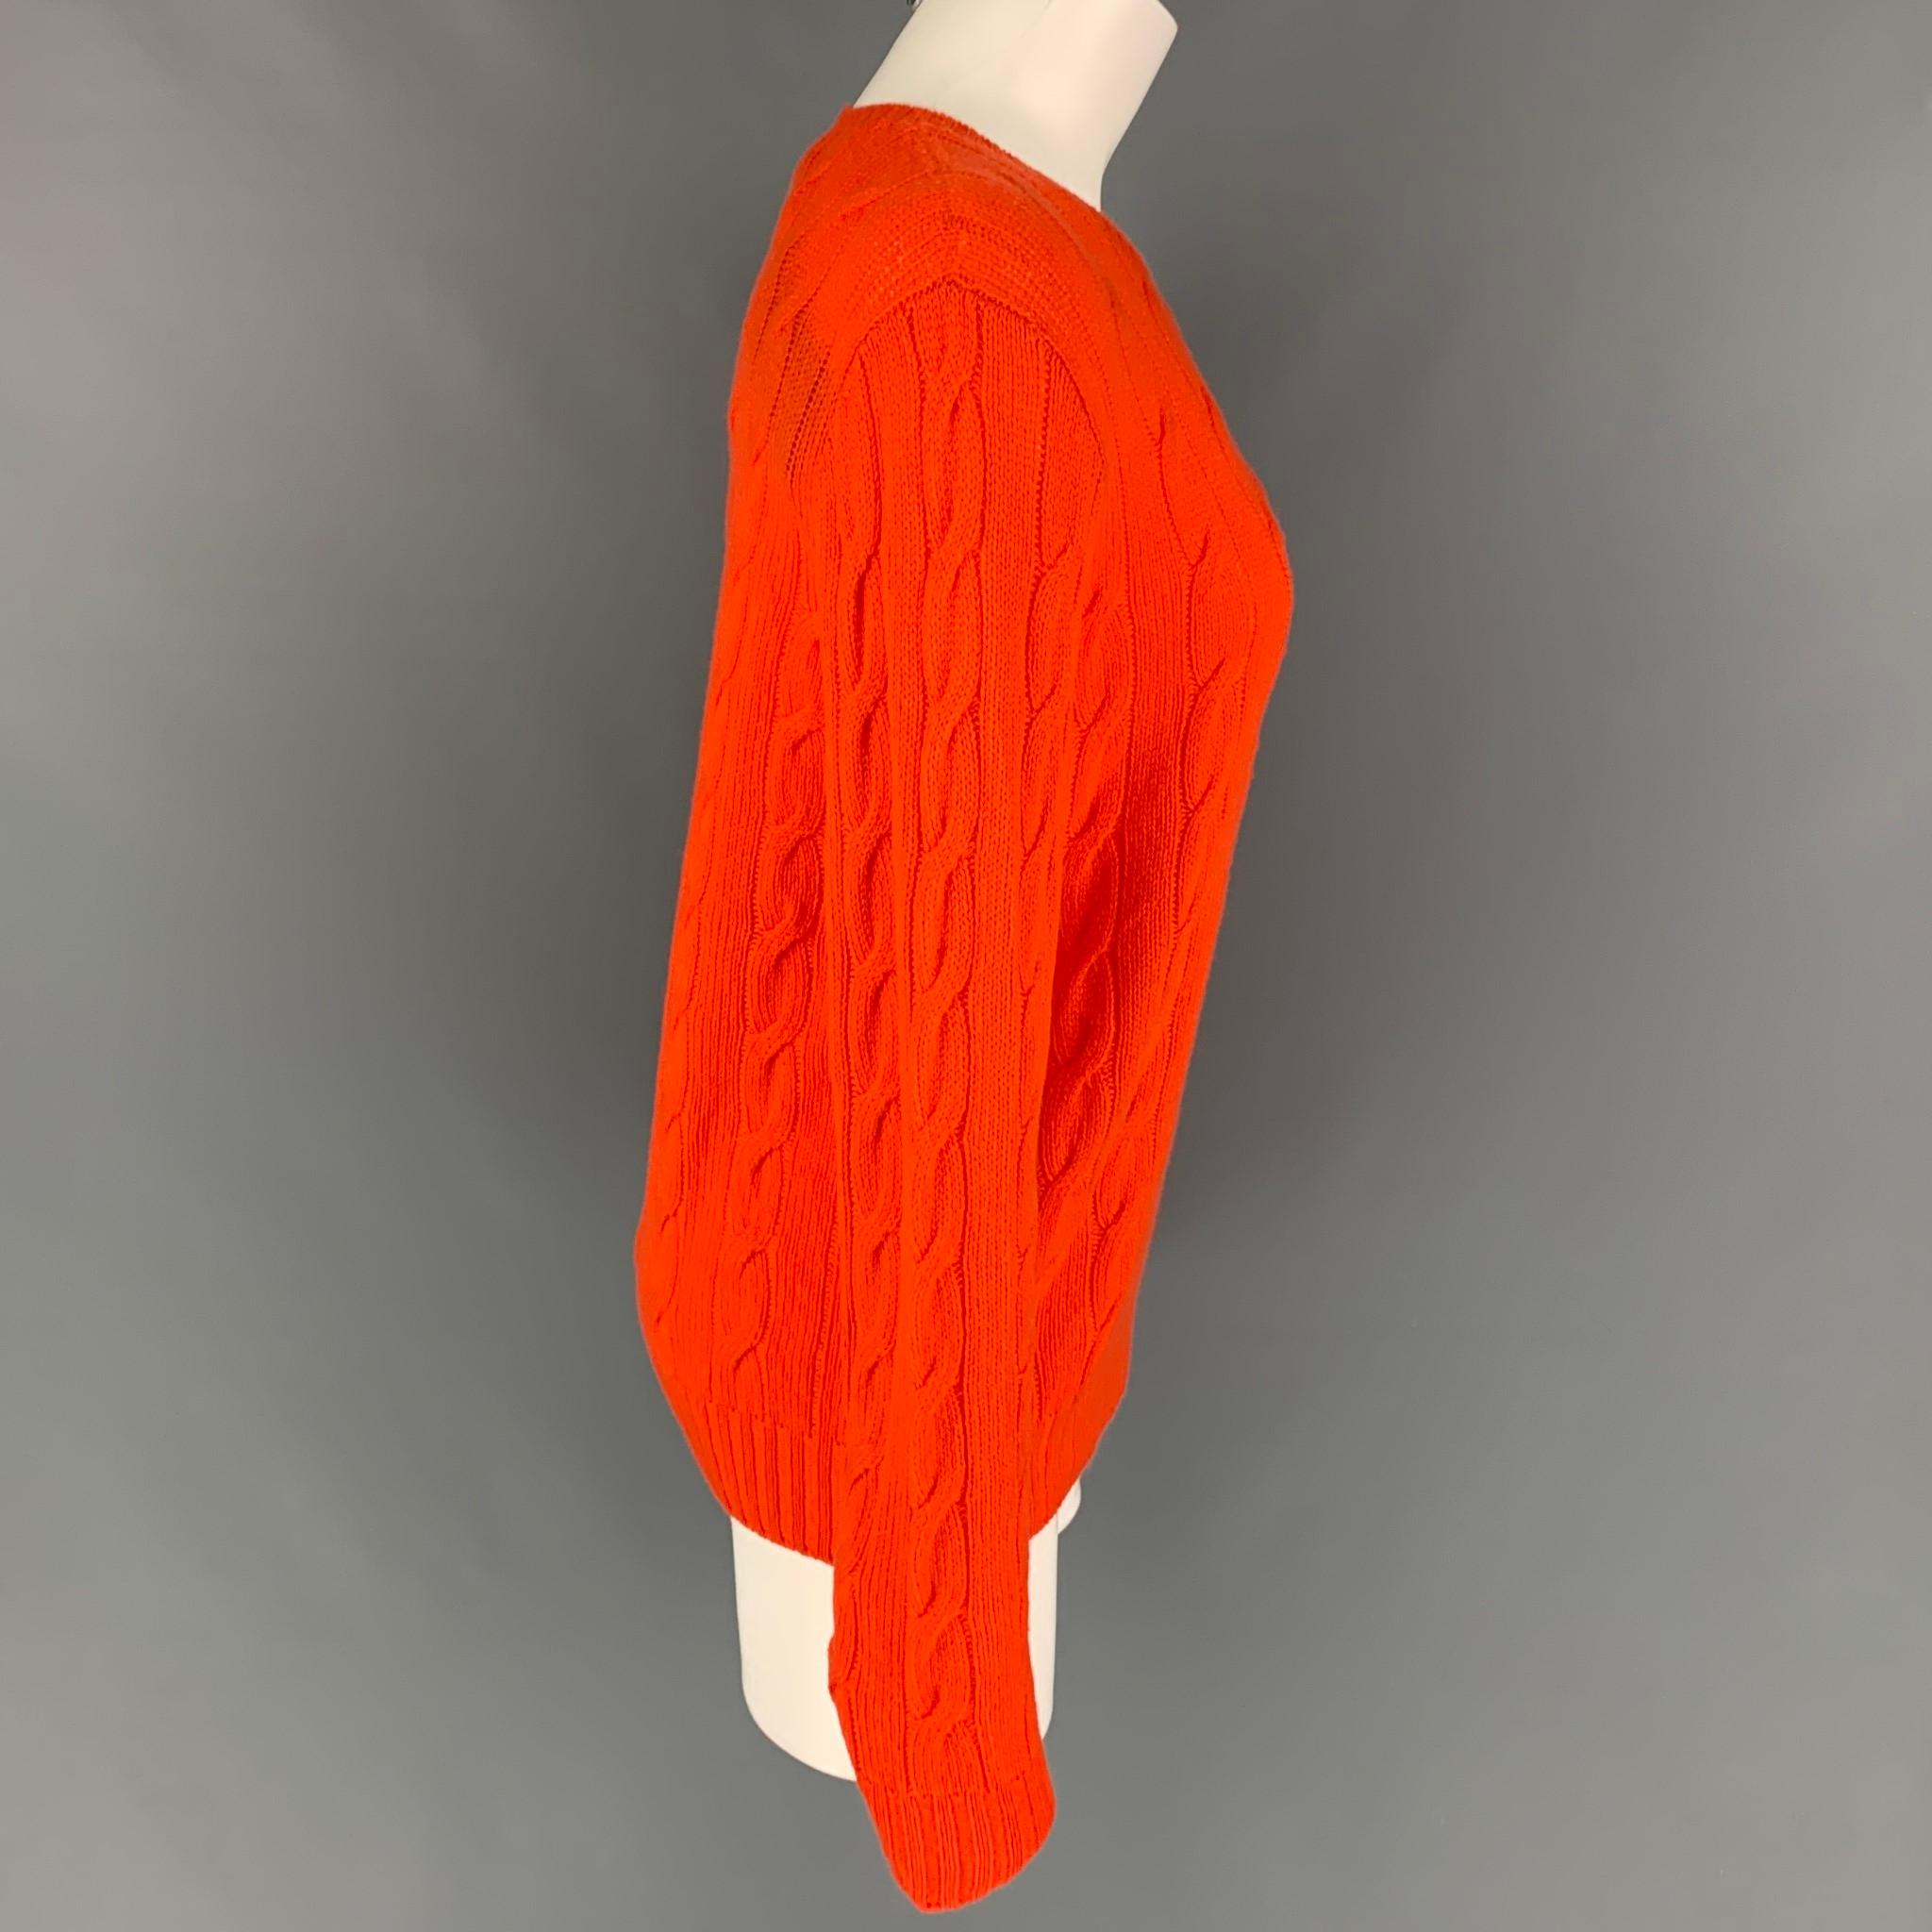 RALPH LAUREN Collection sweater comes in a orange cable knit cashmere featuring a crew-neck. Made in Italy. 

New With Tags.
Marked: L
Original Retail Price: $995.00

Measurements:

Shoulder: 17 in.
Bust: 38 in.
Sleeve: 27 in.
Length: 24.5 in. 